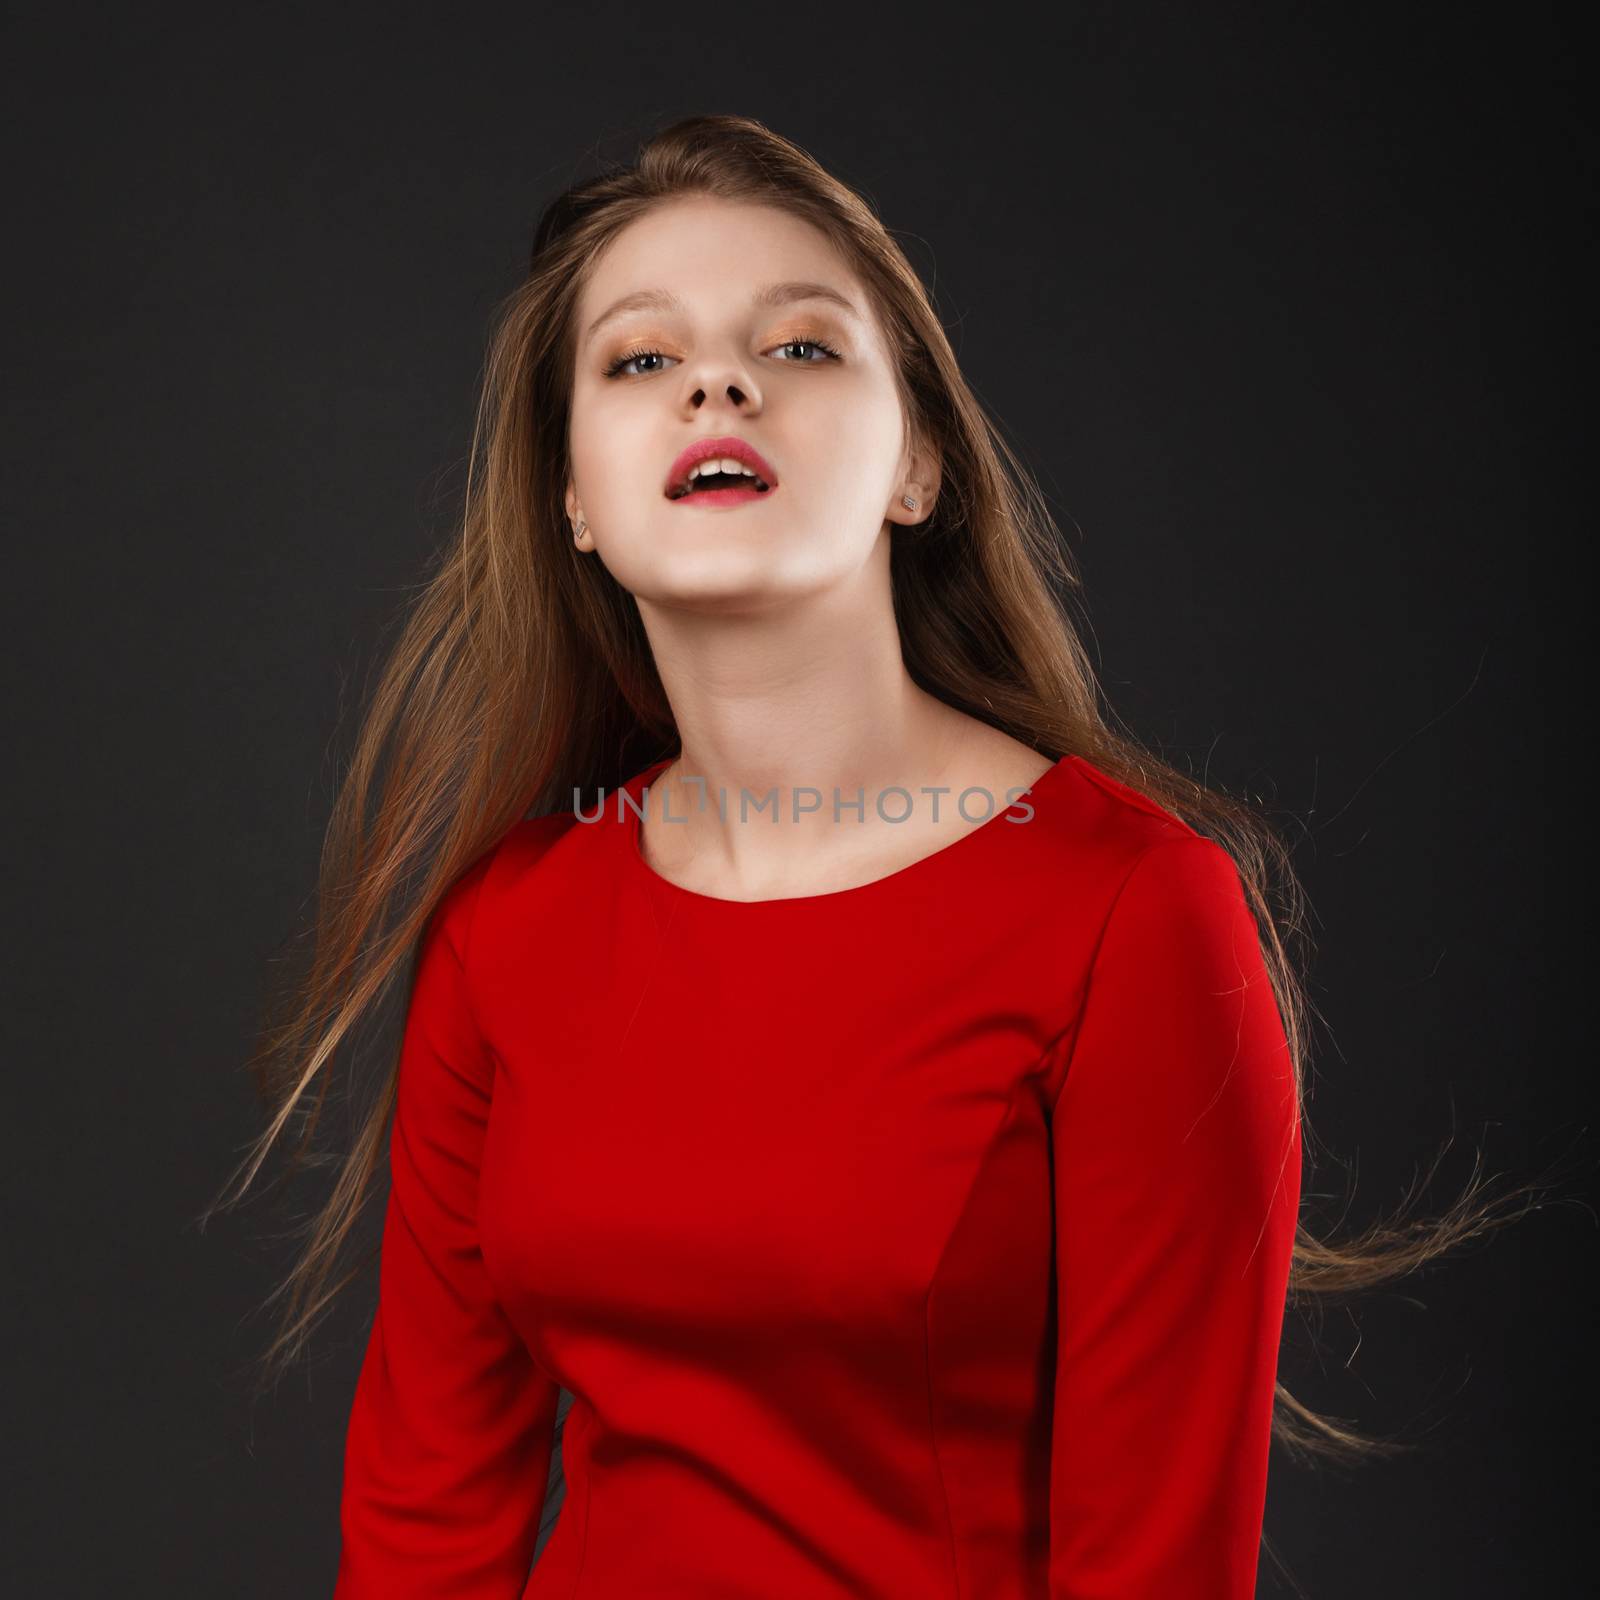 Portrait of a young beautiful girl with eyes closed in a red dre by natazhekova